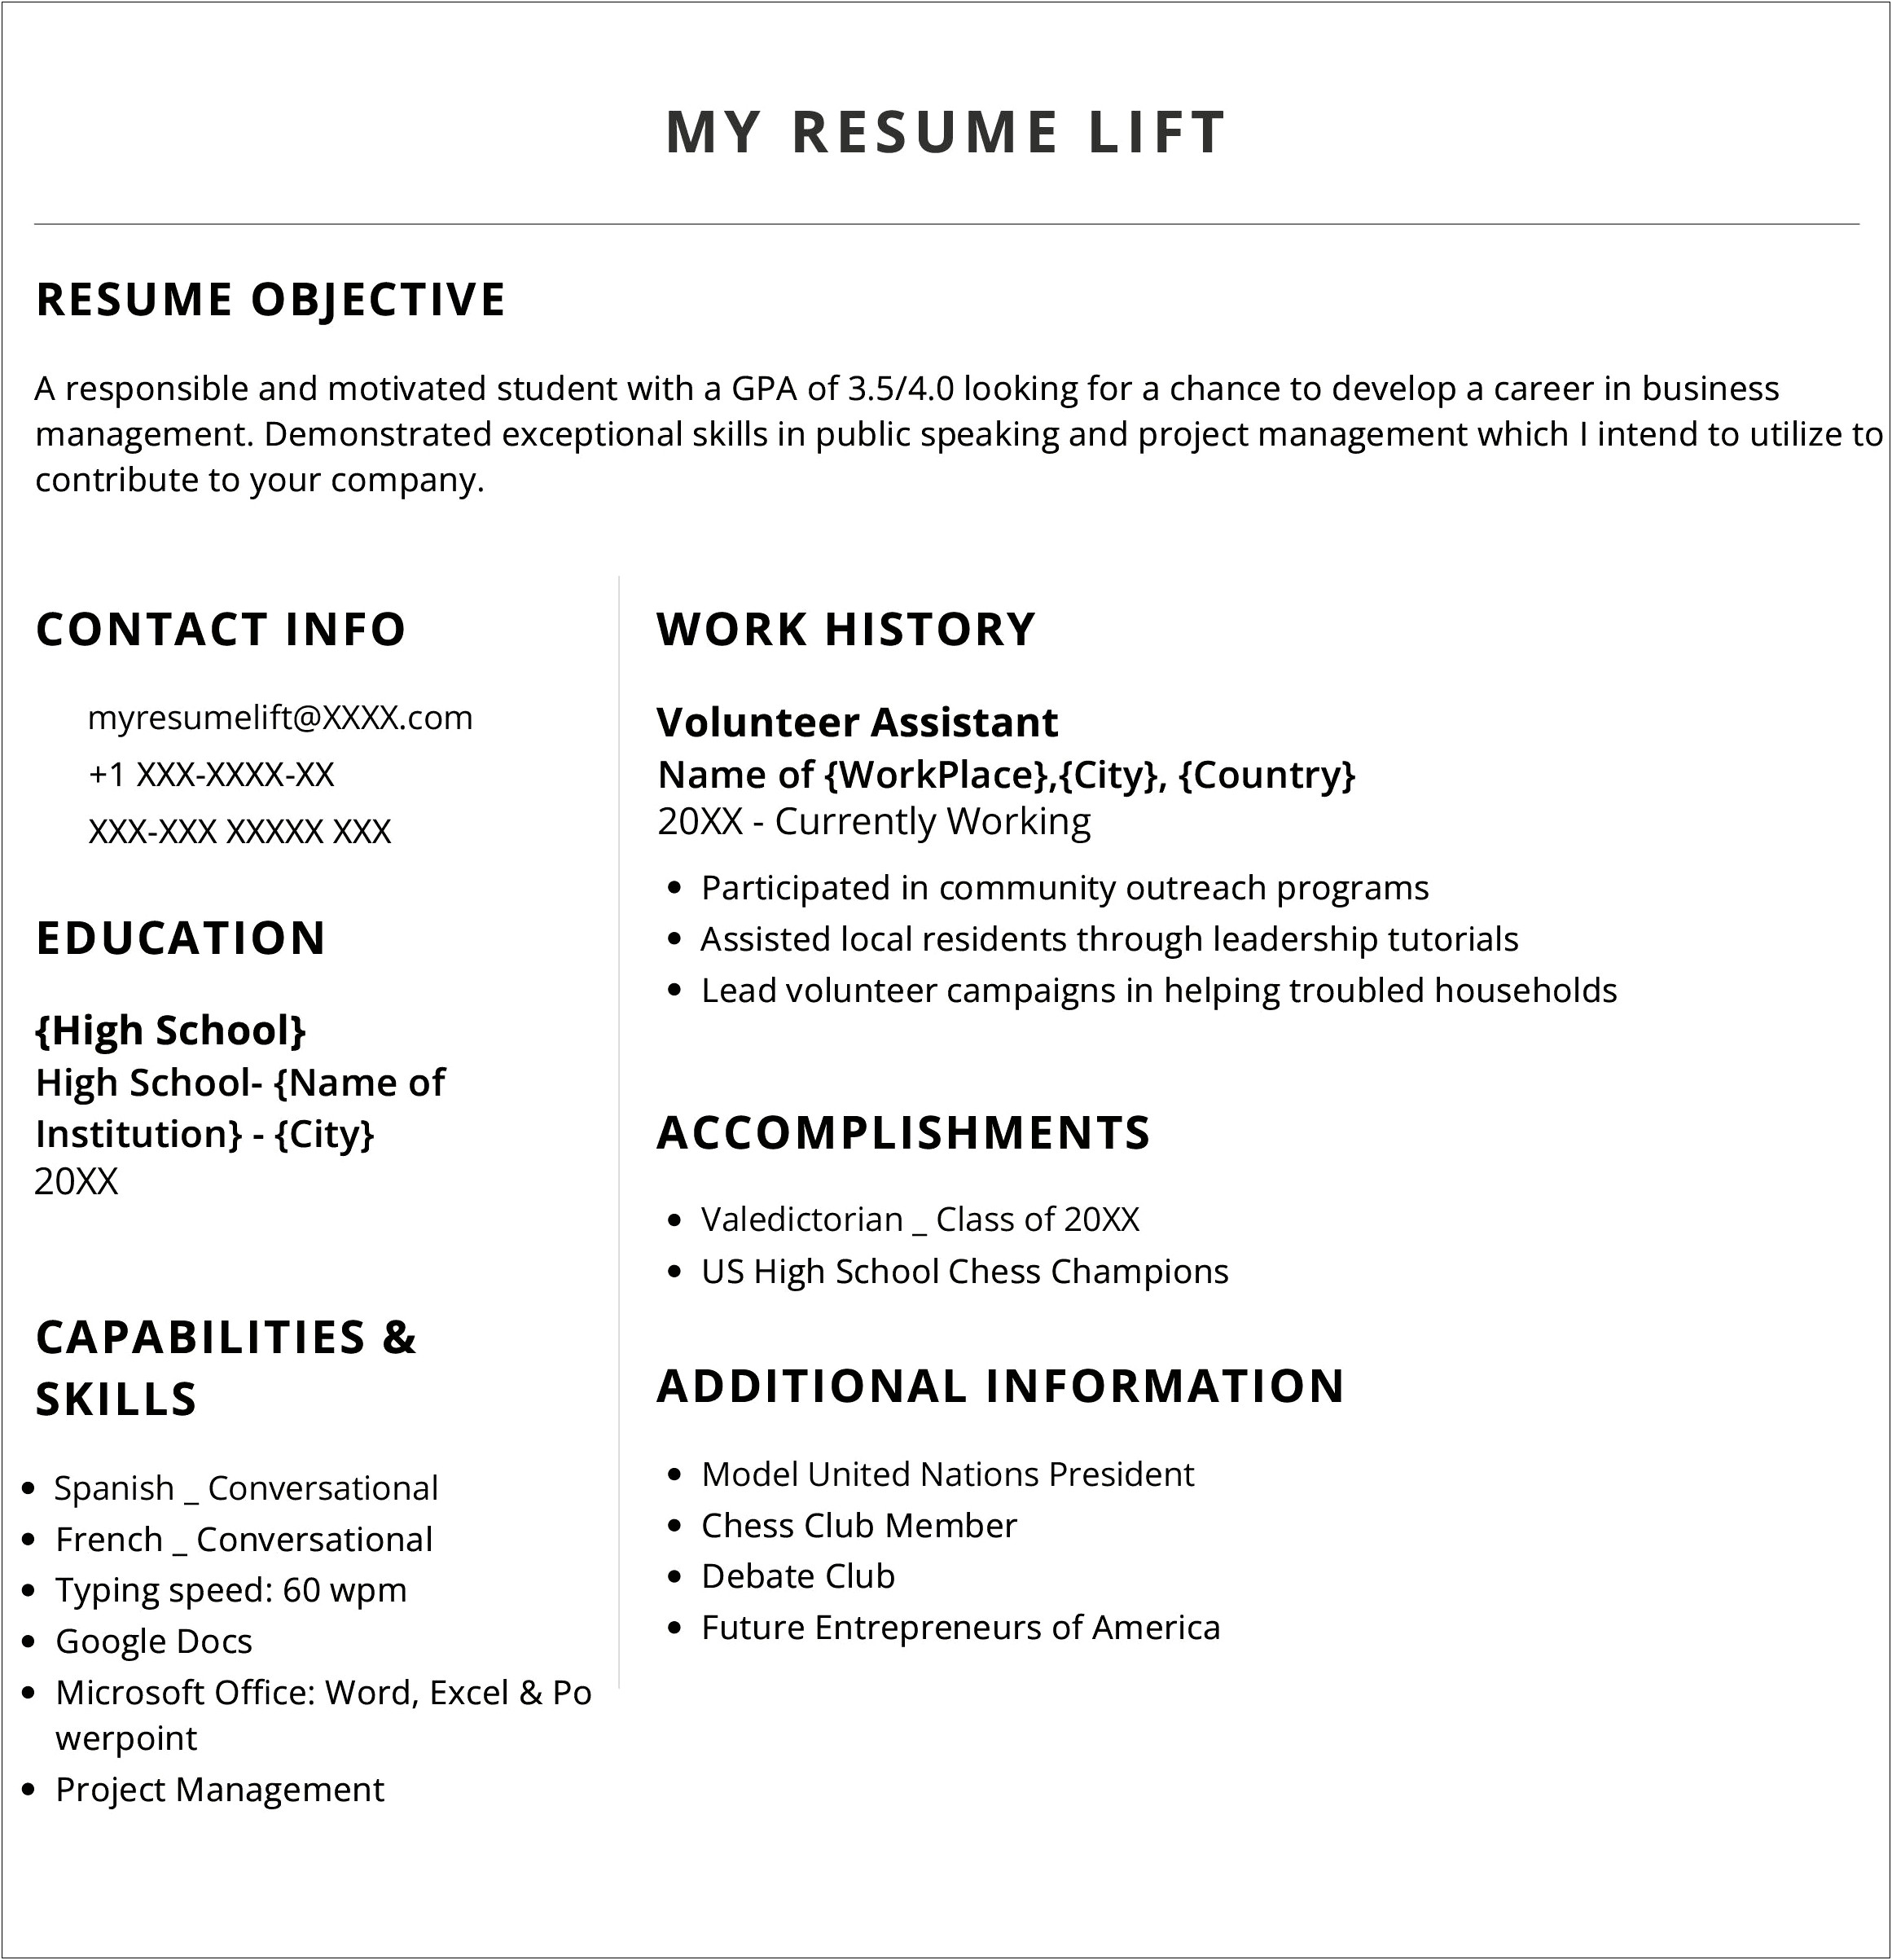 Resume Objectives For A Highschool Student